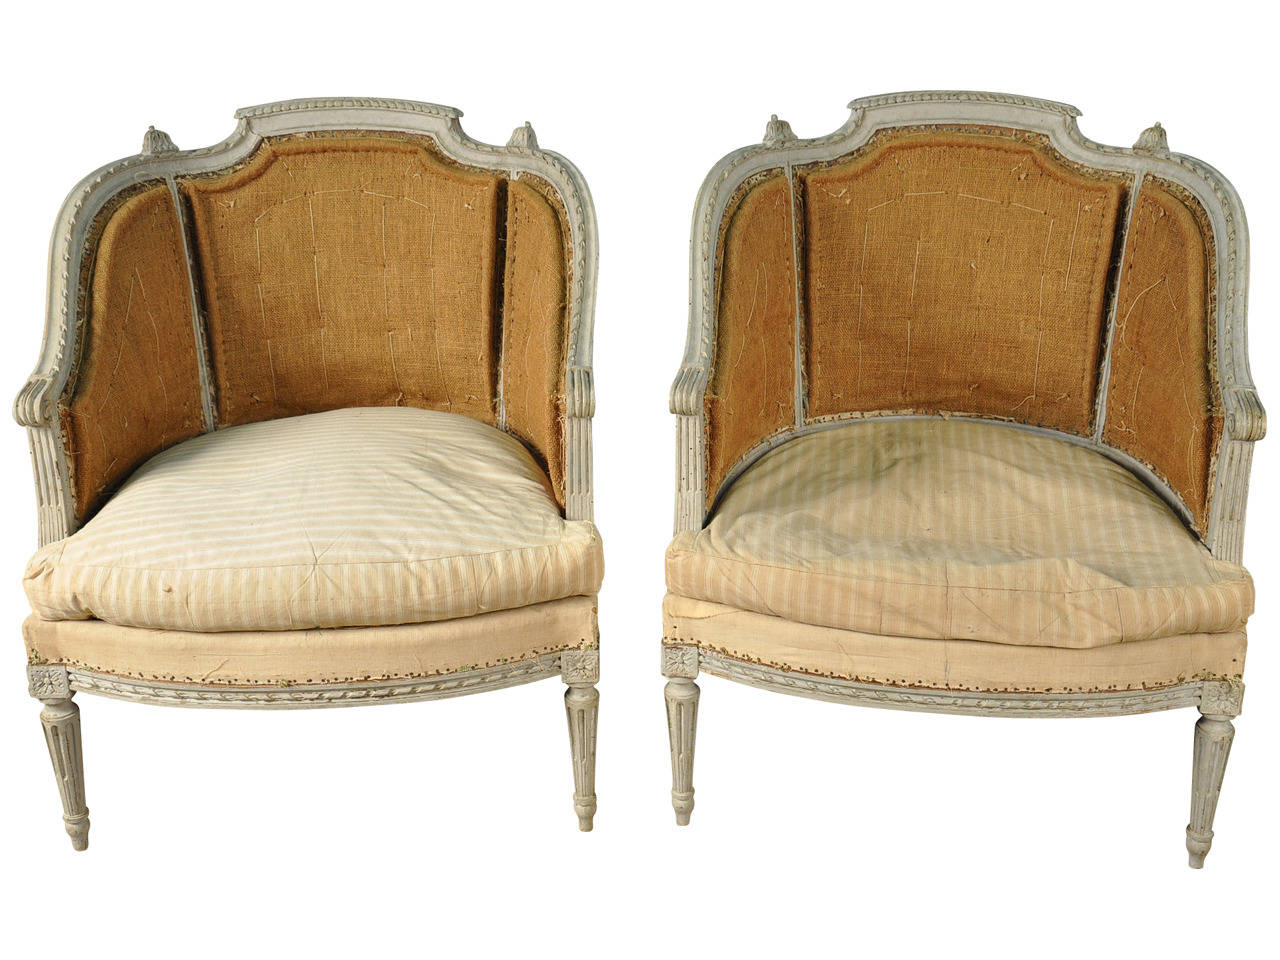 A fabulous pair of French 19th century Louis XVI style Marquises Bergeres in painted wood.  Soundly constructed with elegant carving detail.  The painted finish of this lovely pair of armchairs is in a classical soft French grey.